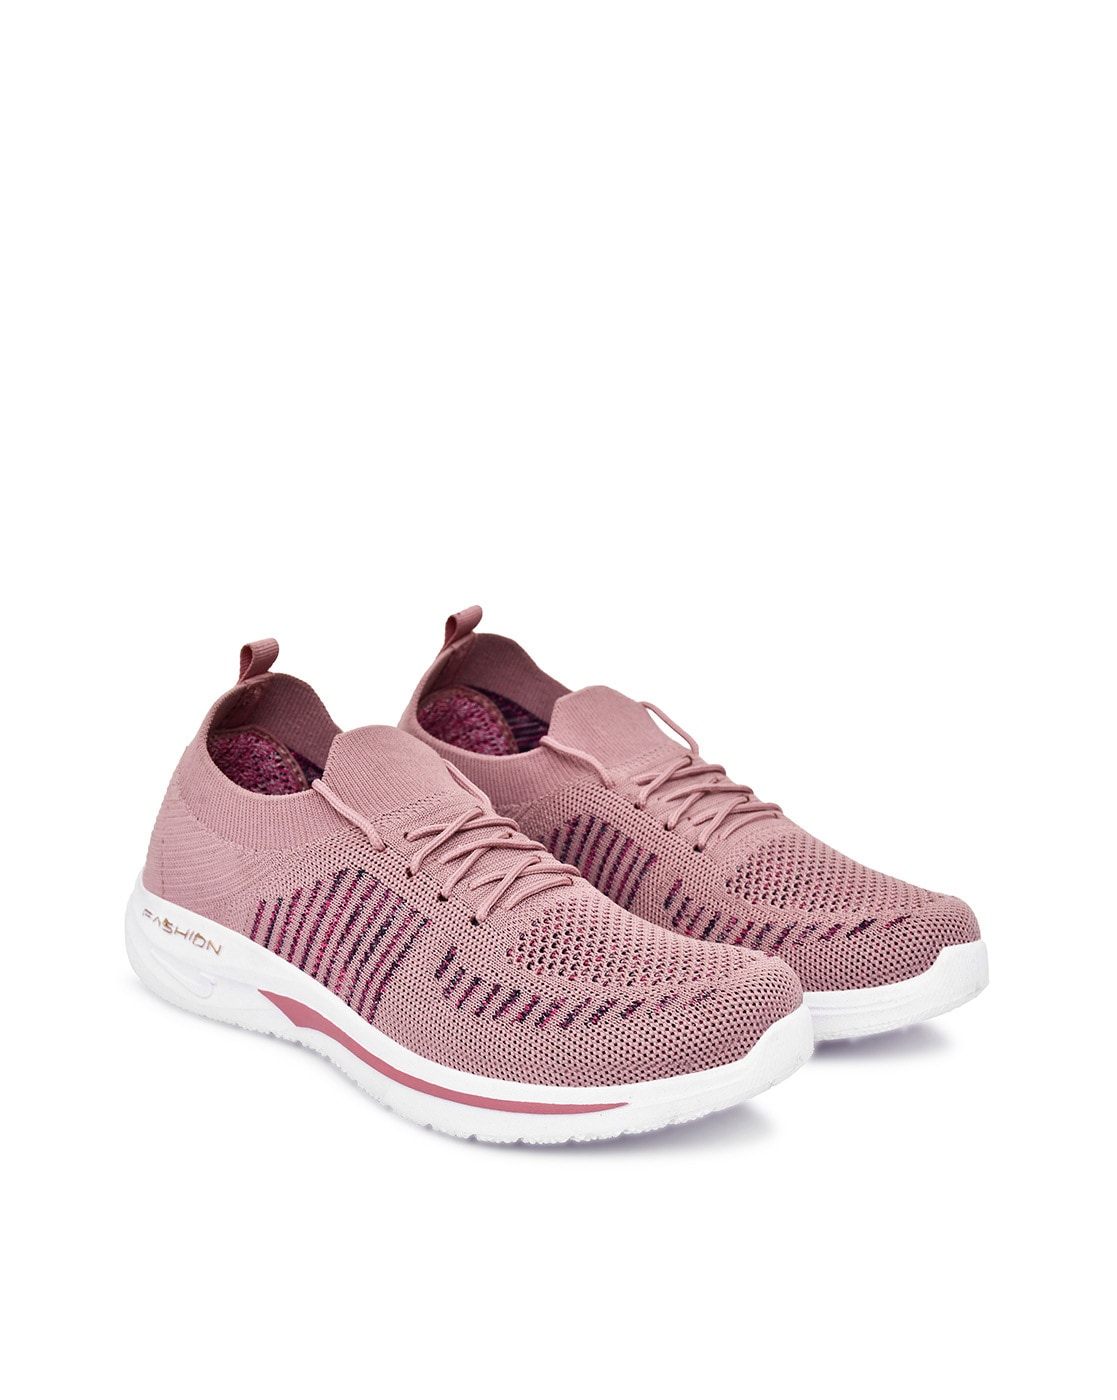 Buy Peach Sports Shoes for Women by AEROBORN Online